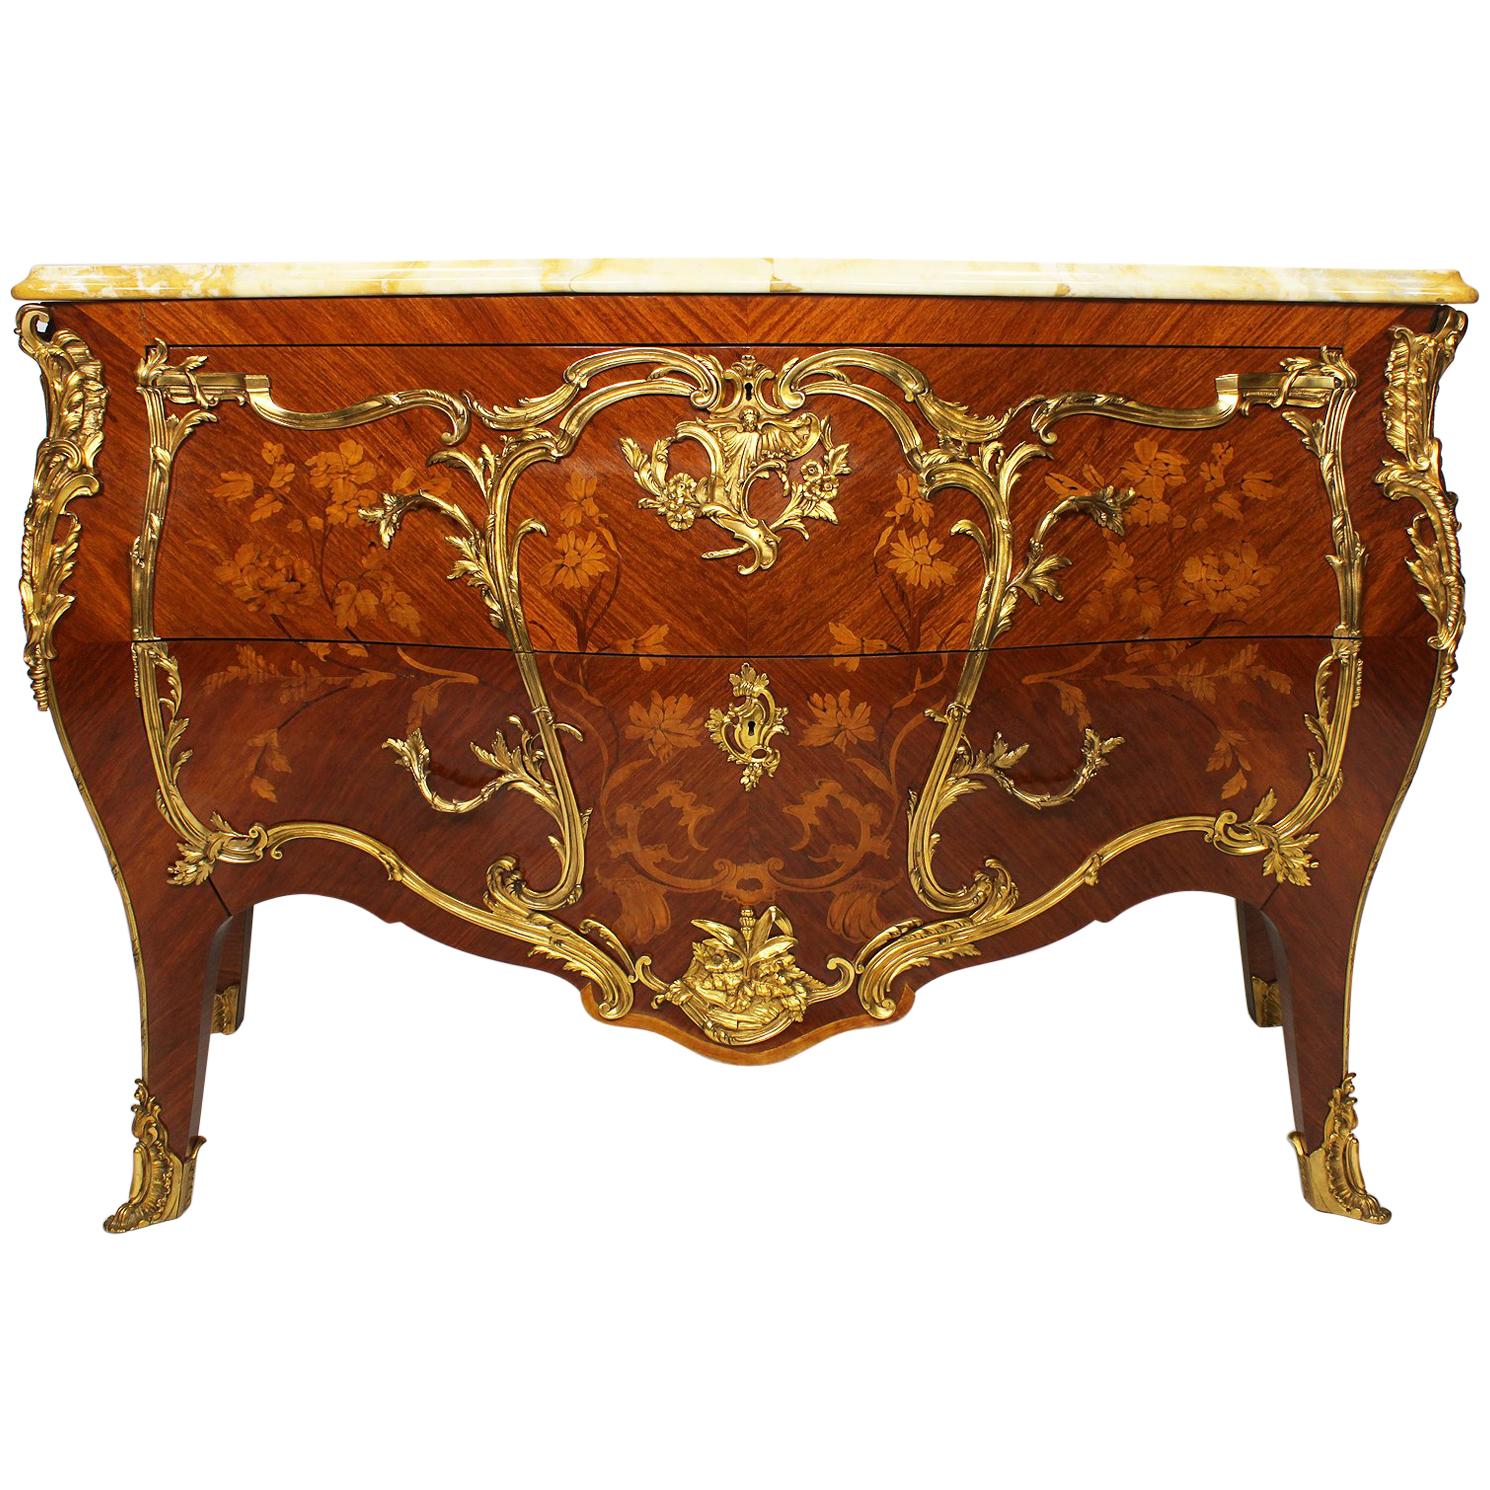 A 19th Century Louis XV Style Gilt-Bronze Mounted & Marquetry Bombé Commode